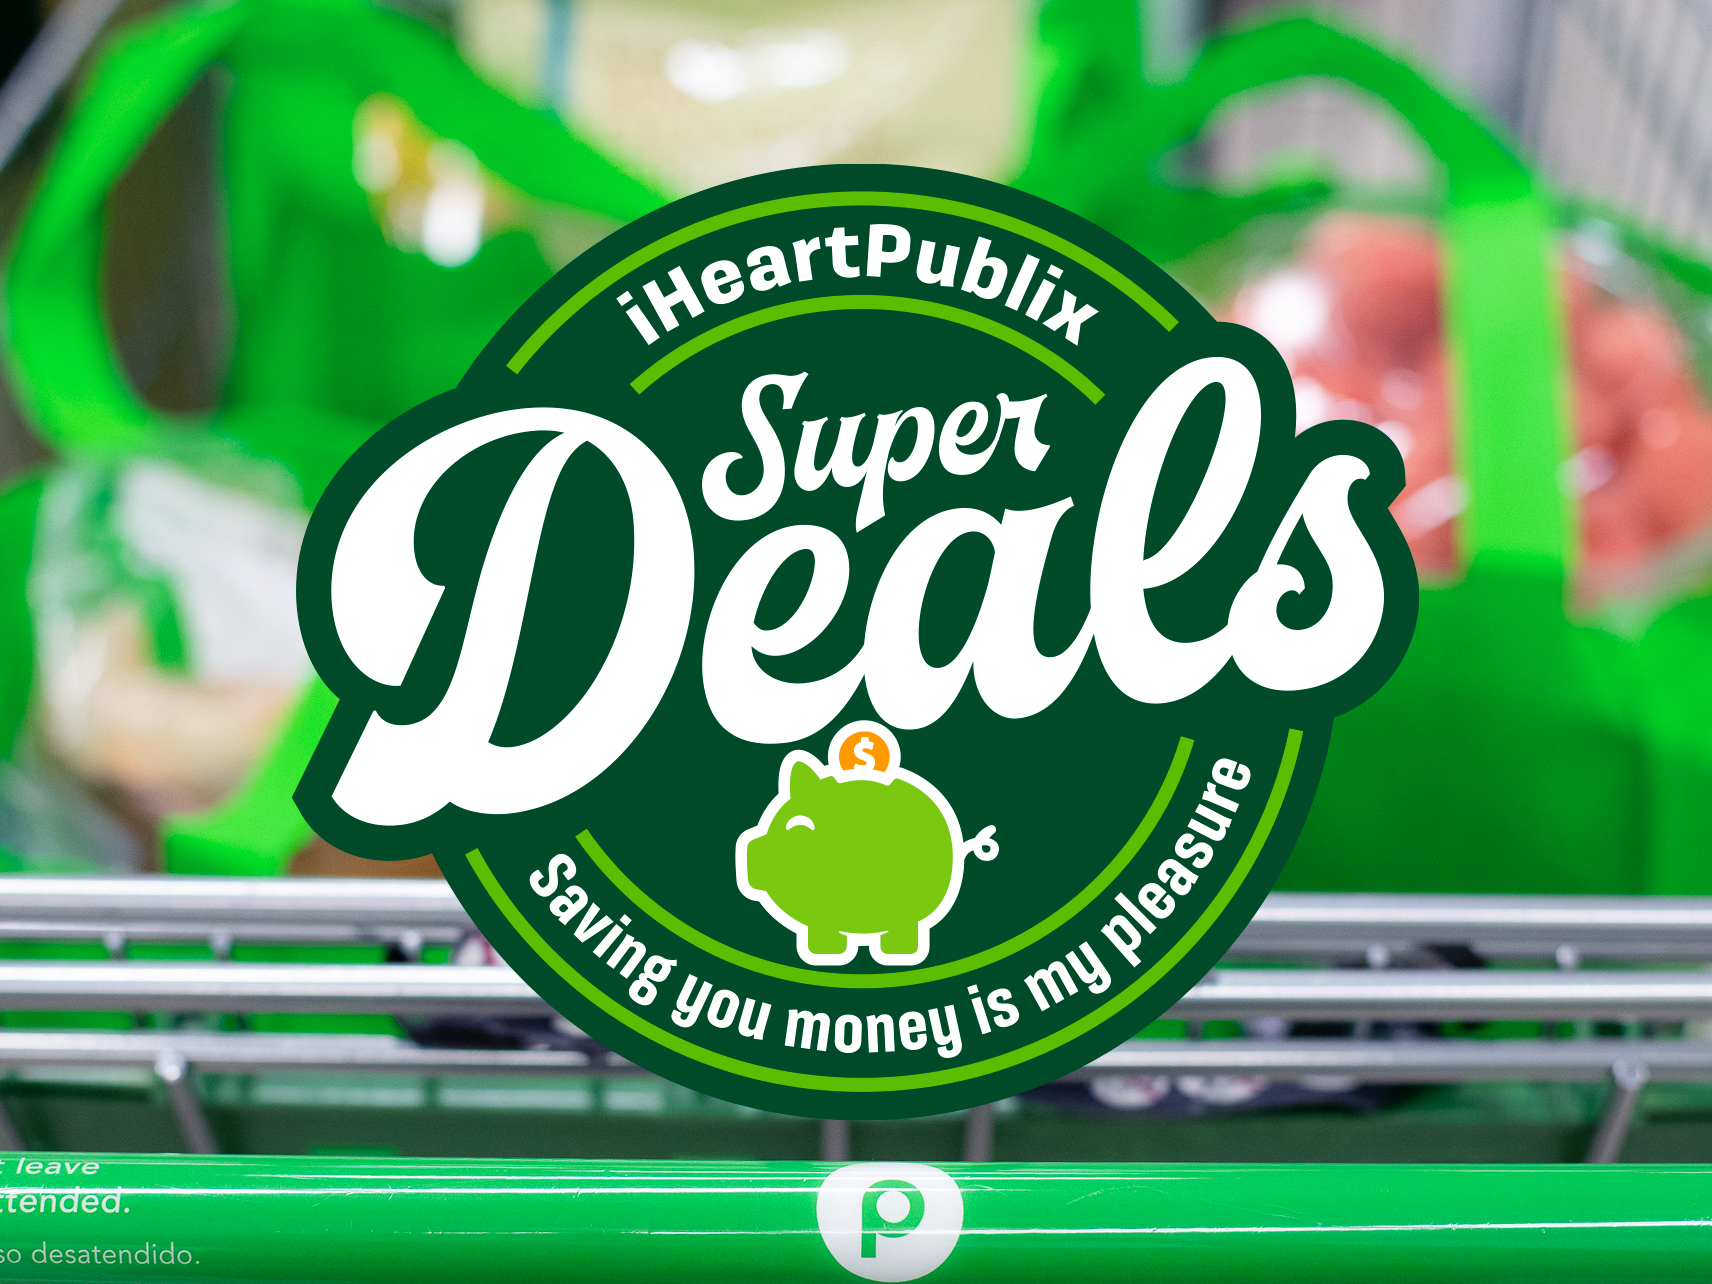 Publix Super Deals Week 11/24 To 11/29 (11/24 to 11/28 For Some)